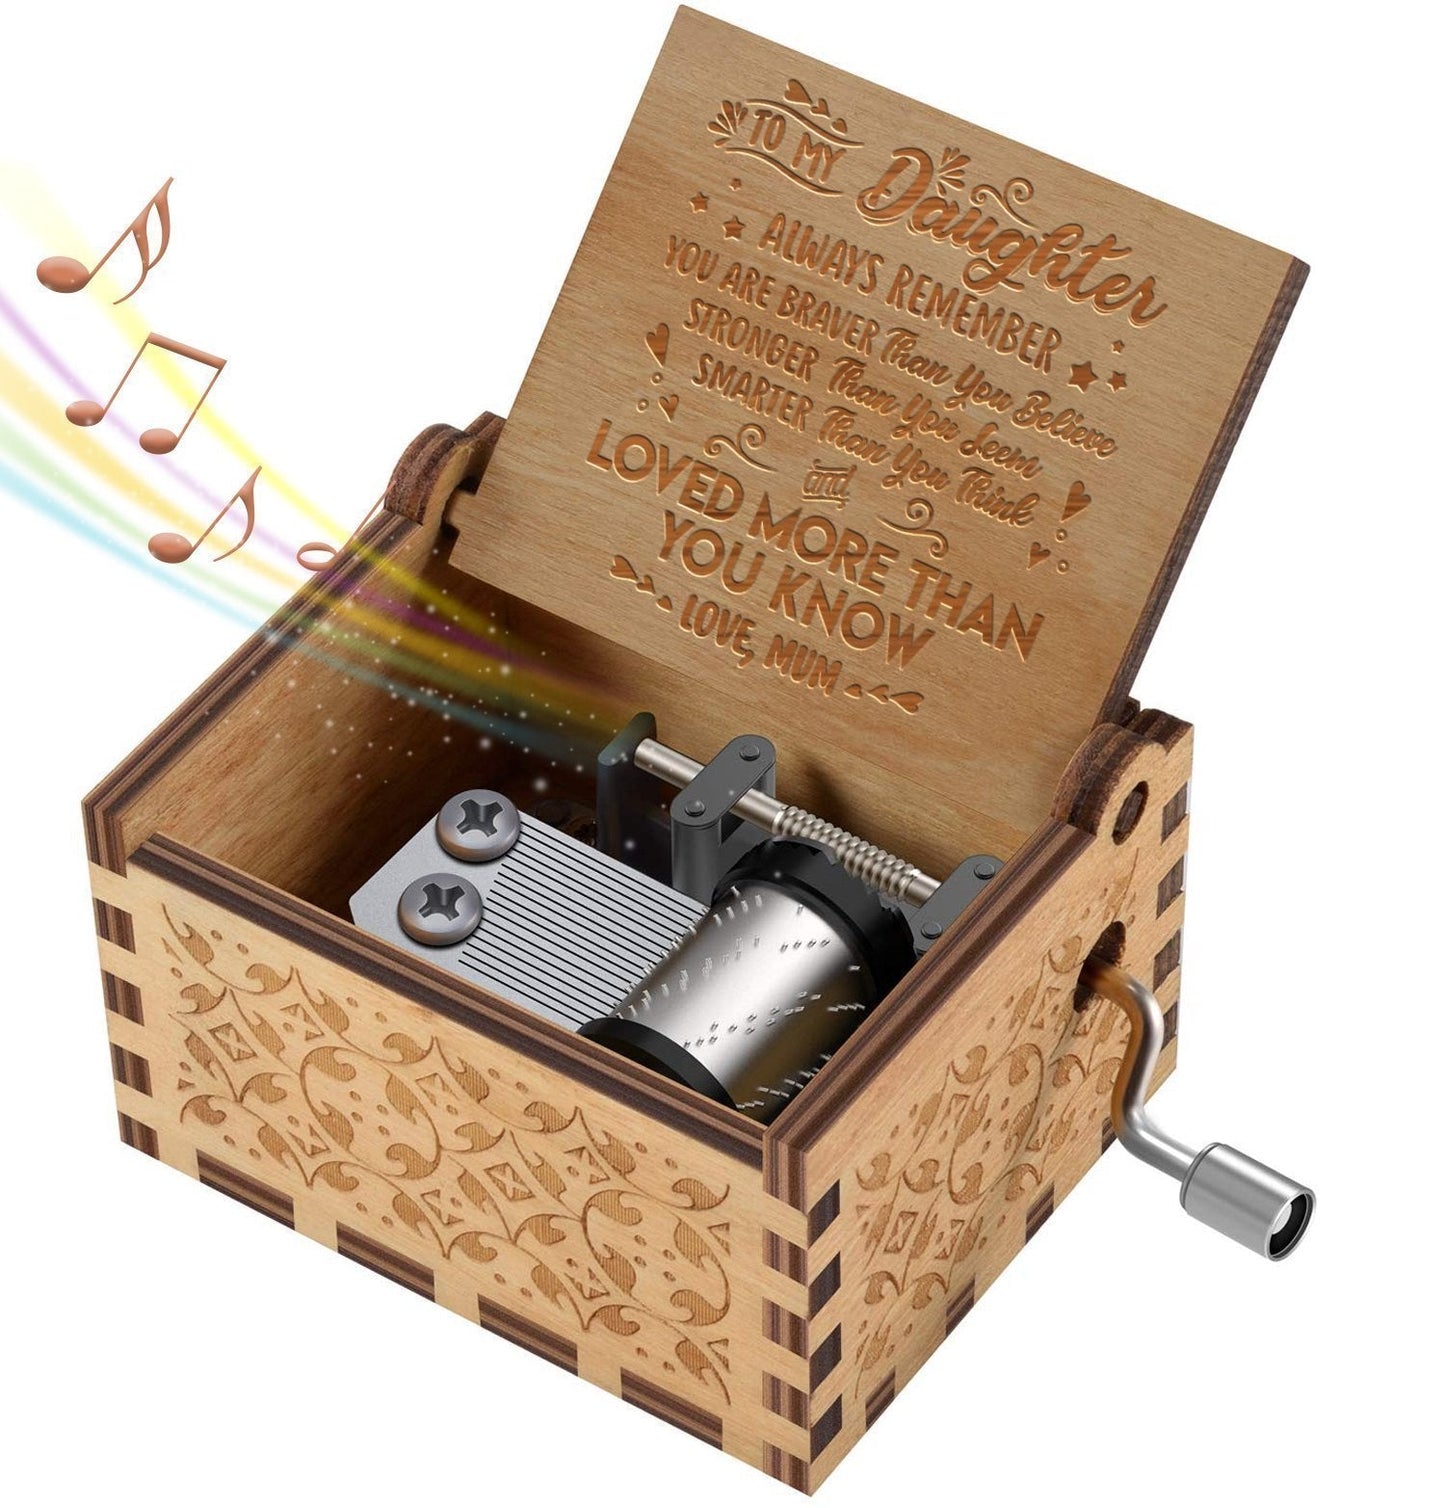 Mum To Daughter - You Are Loved More Than You Know - Engraved Music Box